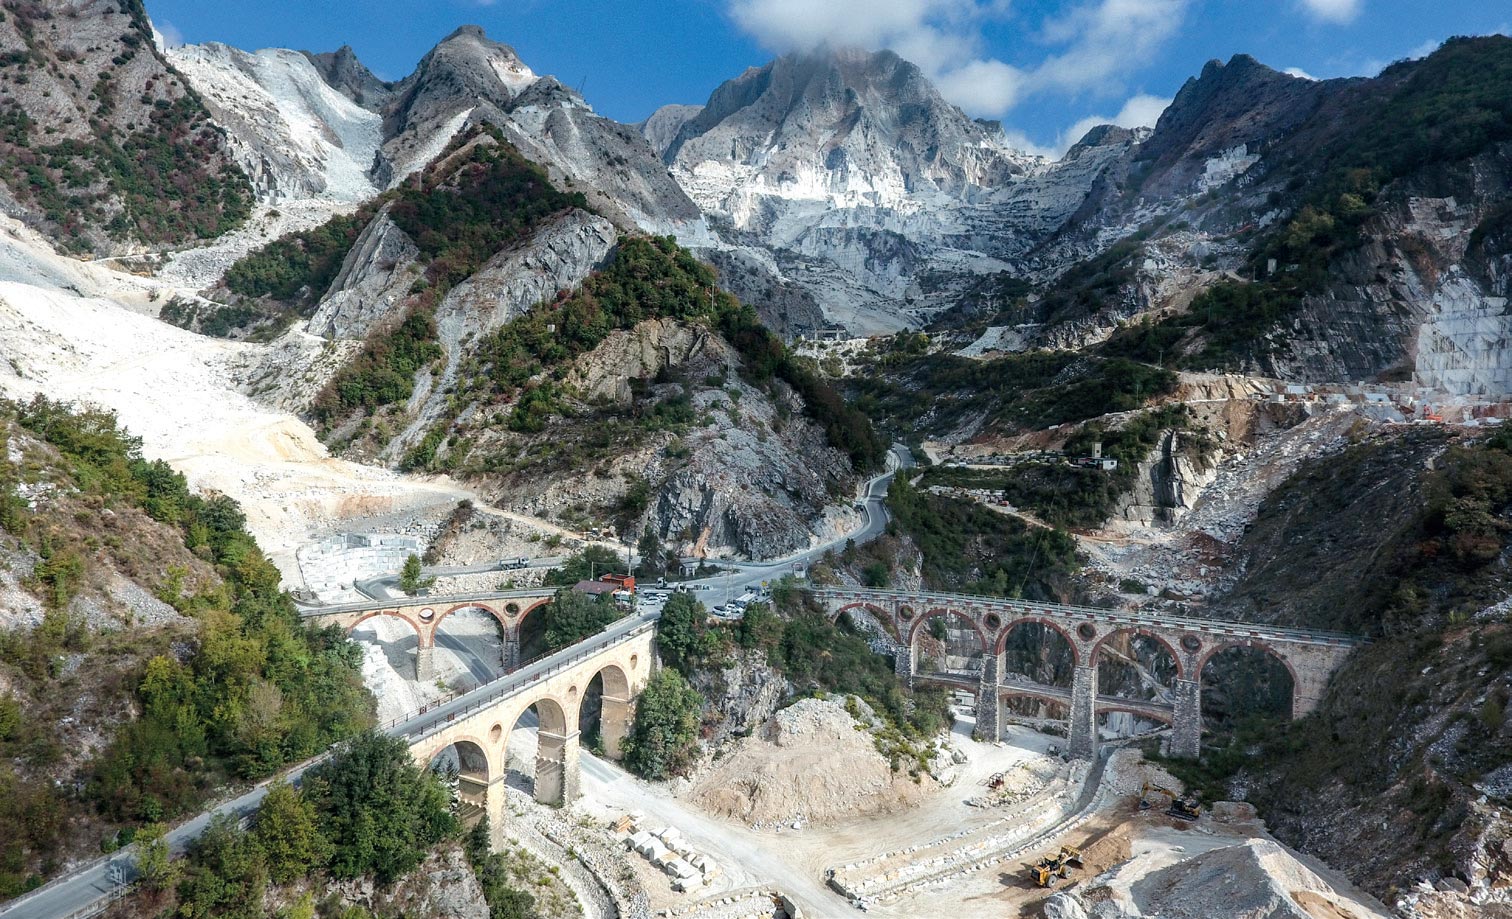 The marble quarries. Photo: Alessandro Pasquali / Danae Project